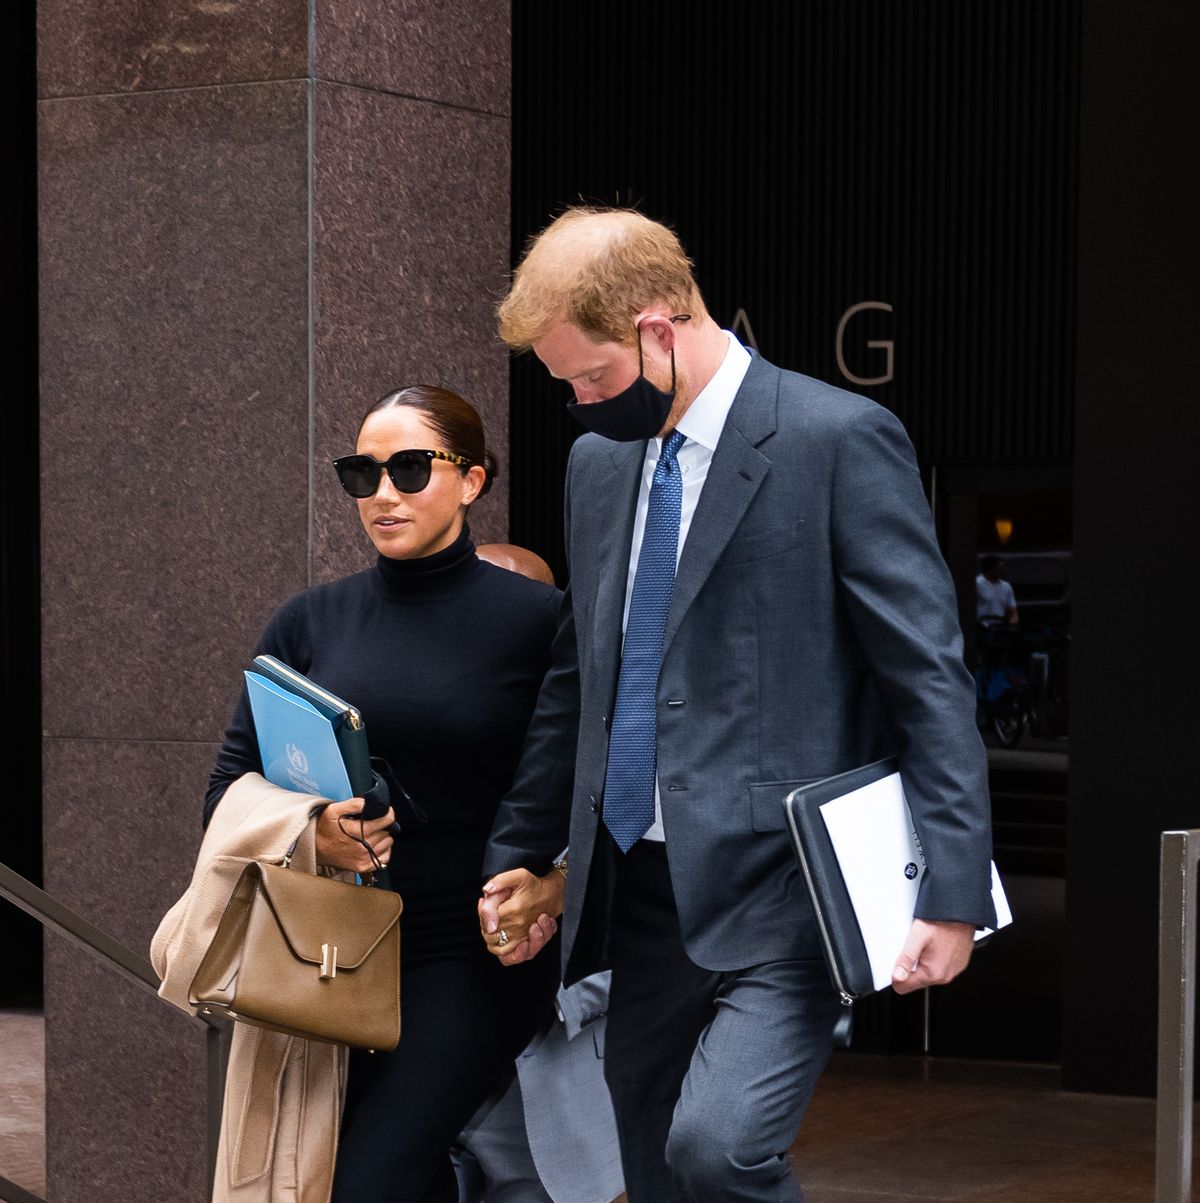 Meghan Markle's stylish cross-body Strathberry bag is back in stock